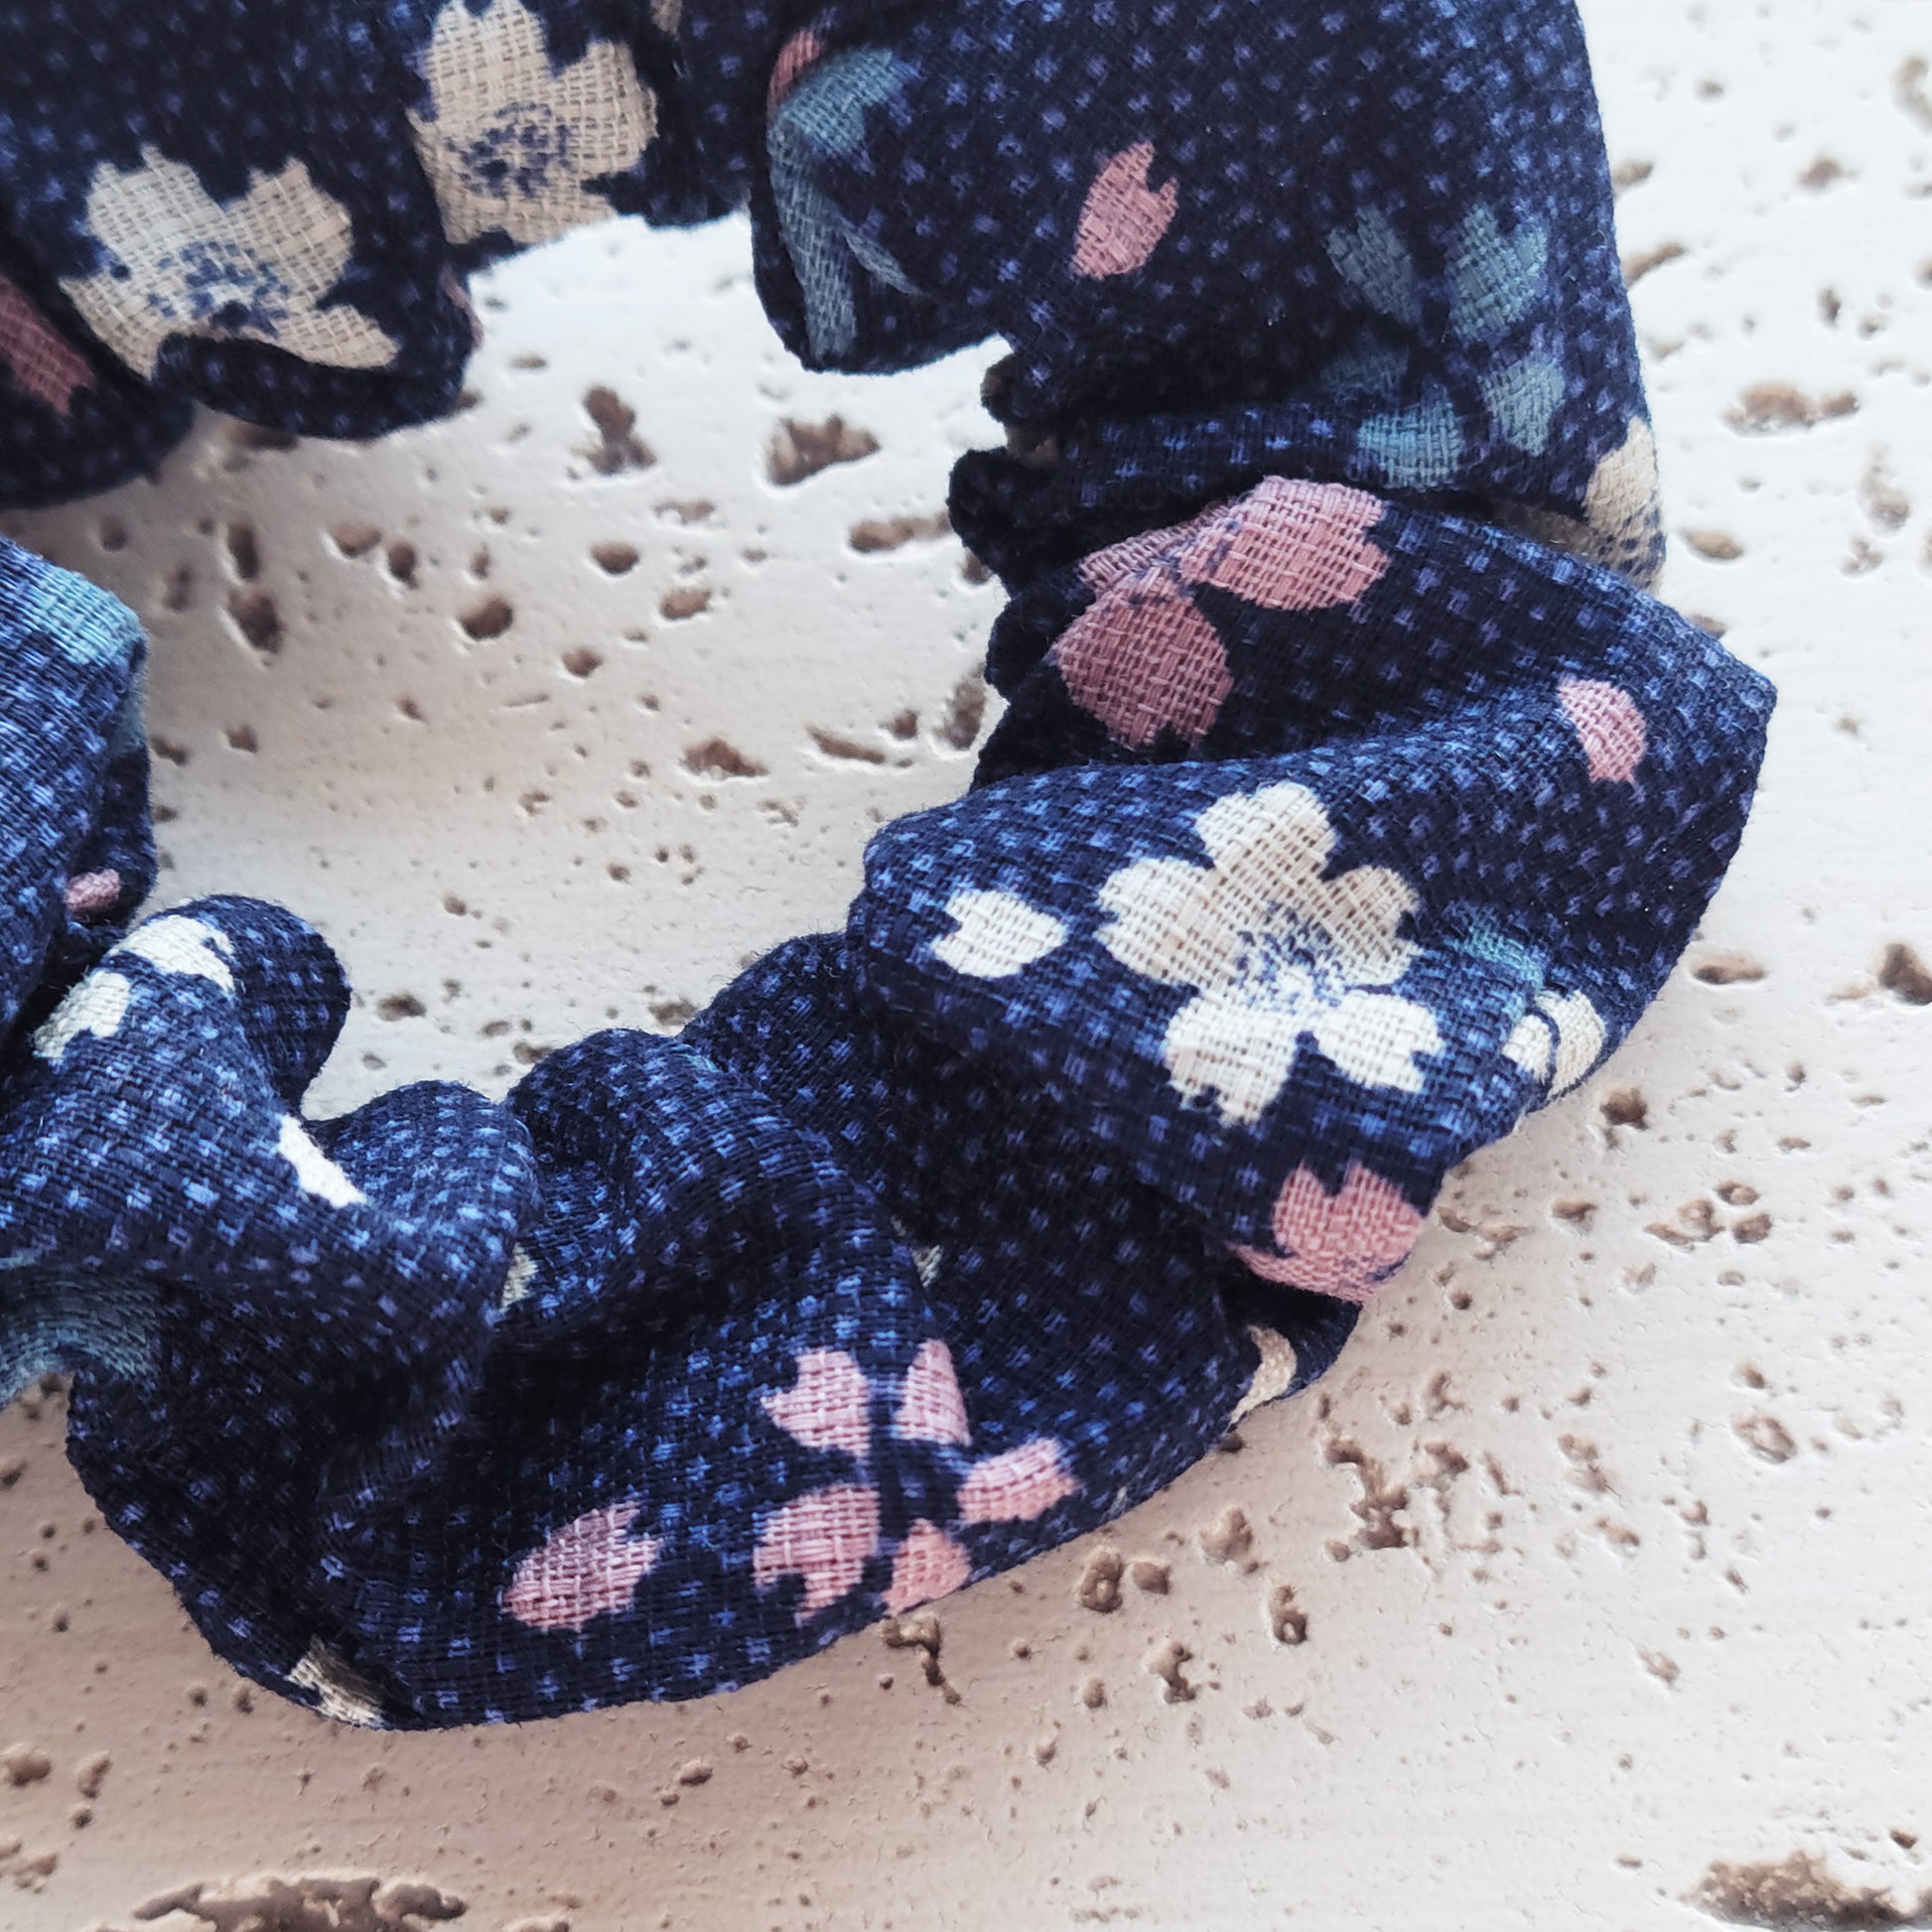 Japanese Fabric Scrunchie - Cherry Blossoms in Blue